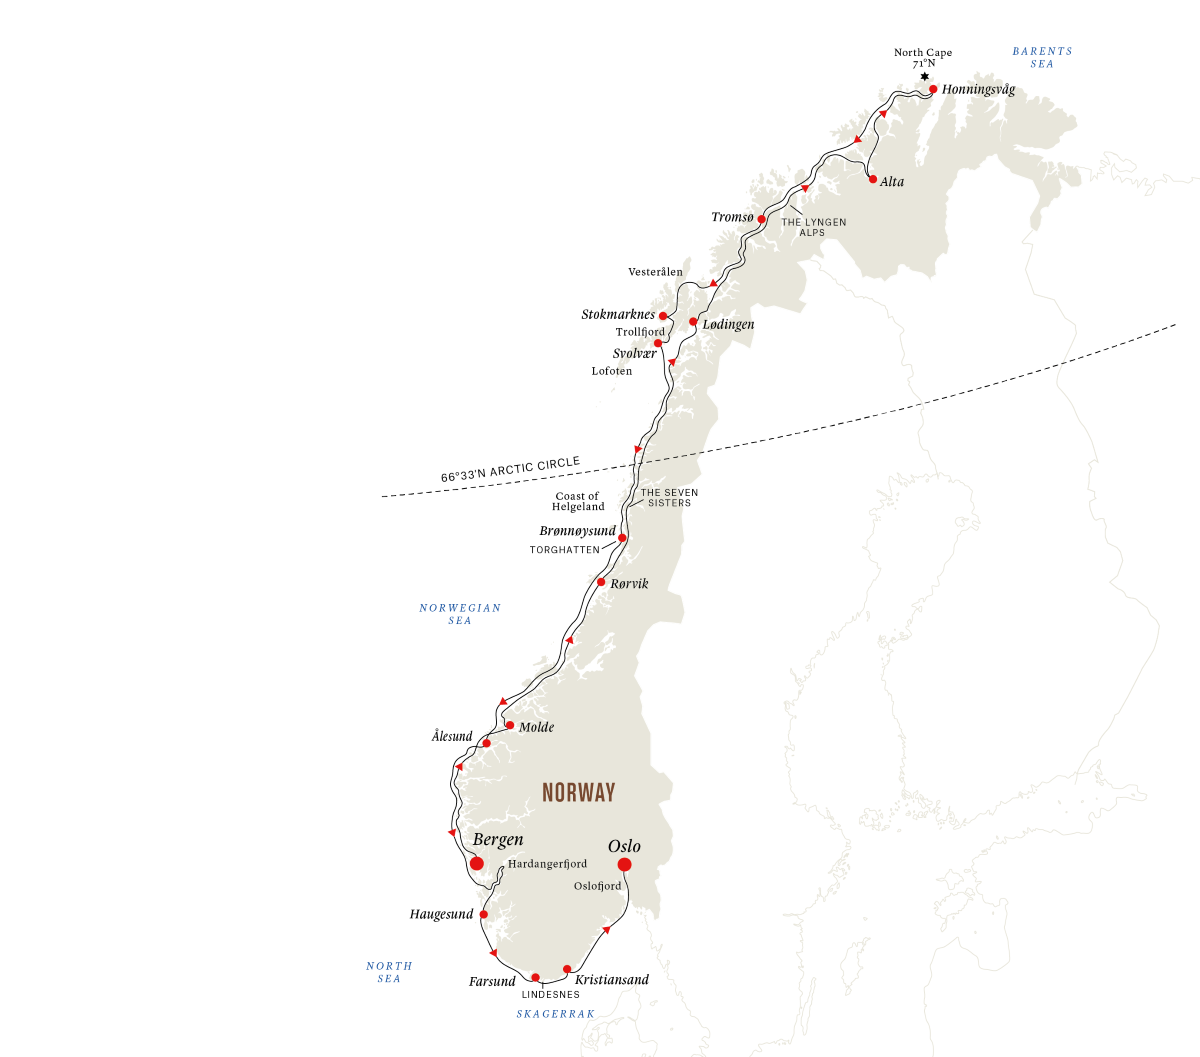 The North Cape Express - Full Voyage from Bergen